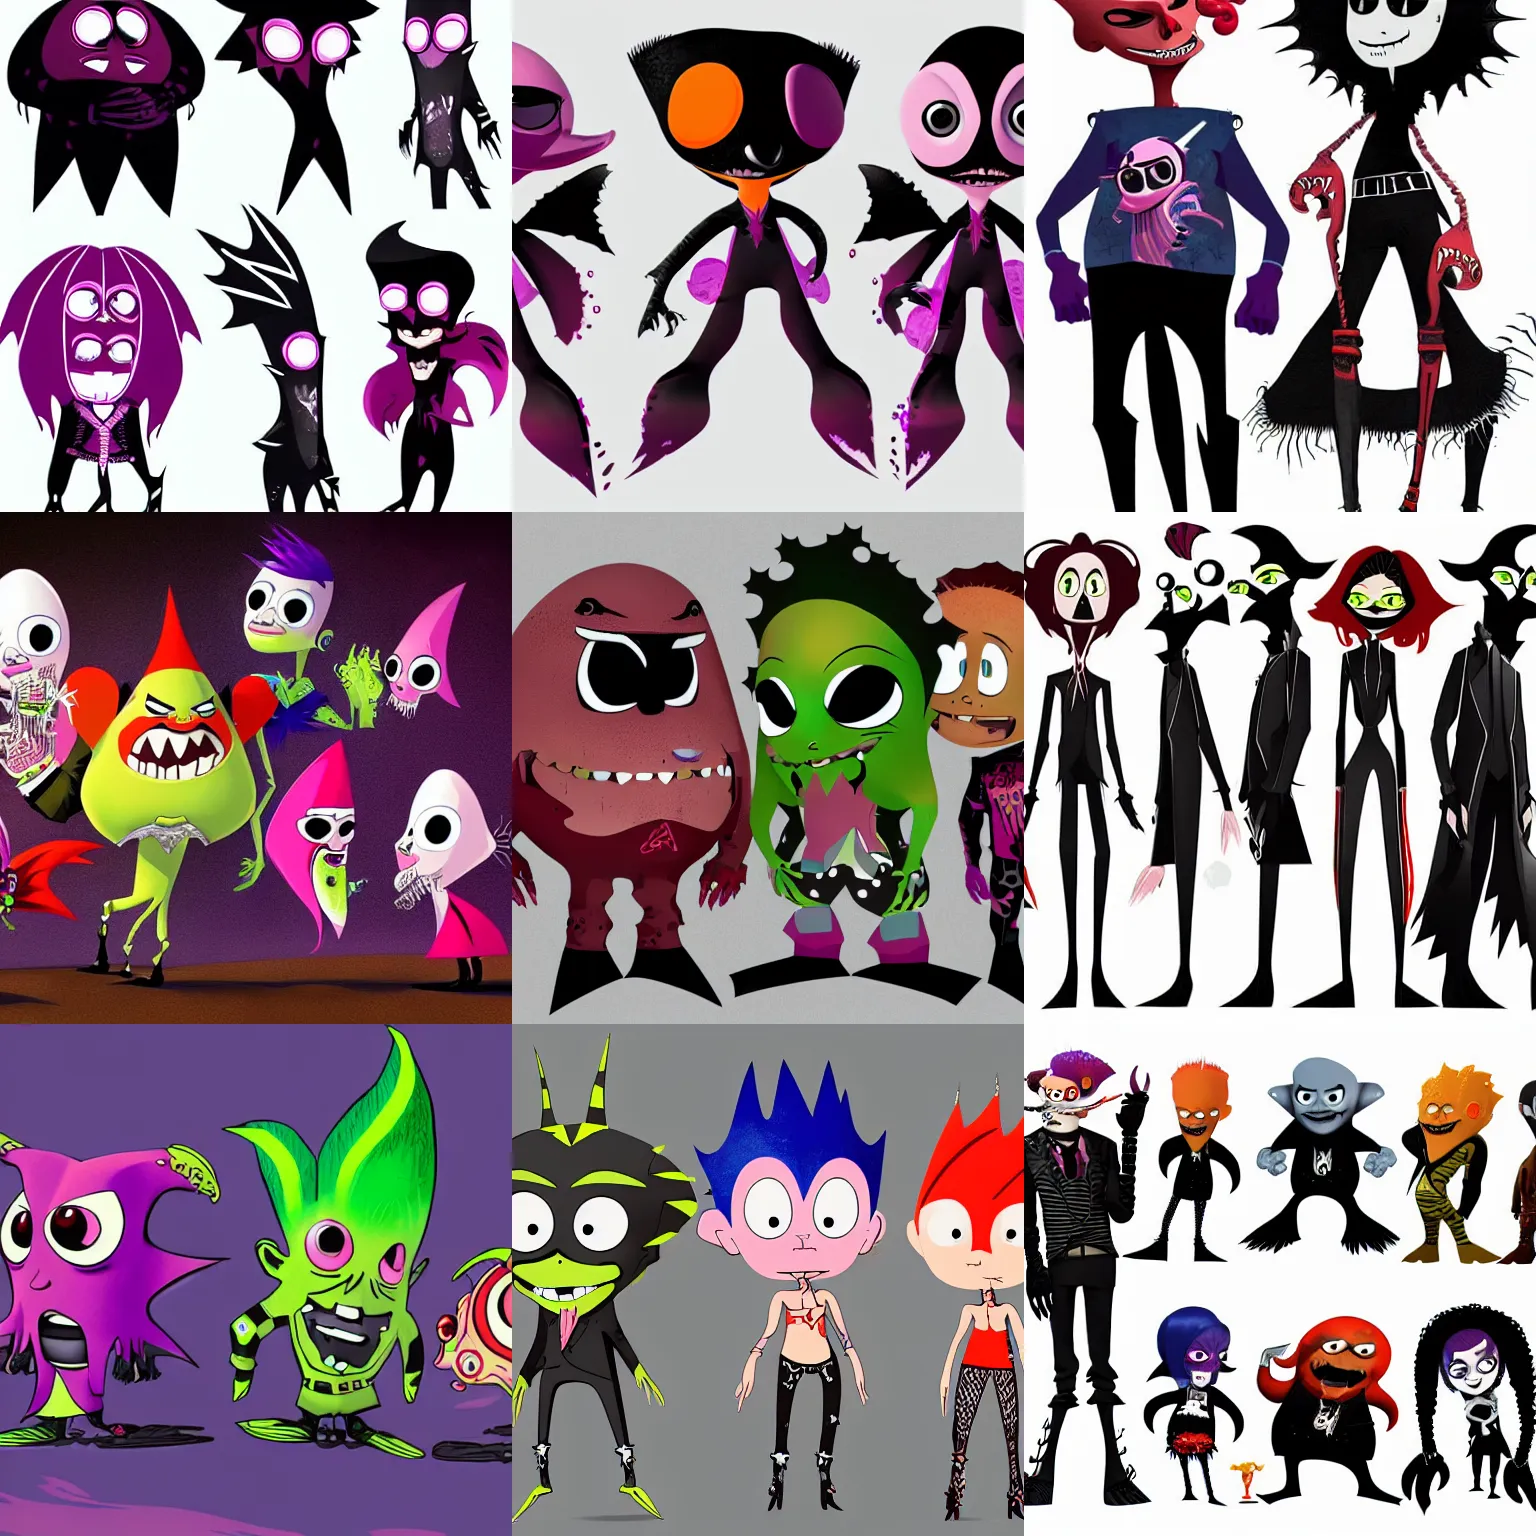 Prompt: punk rockstar vampire squid concept character designs of various shapes and sizes by genndy tartakovsky and splatoon by nintendo for the new hotel transylvania